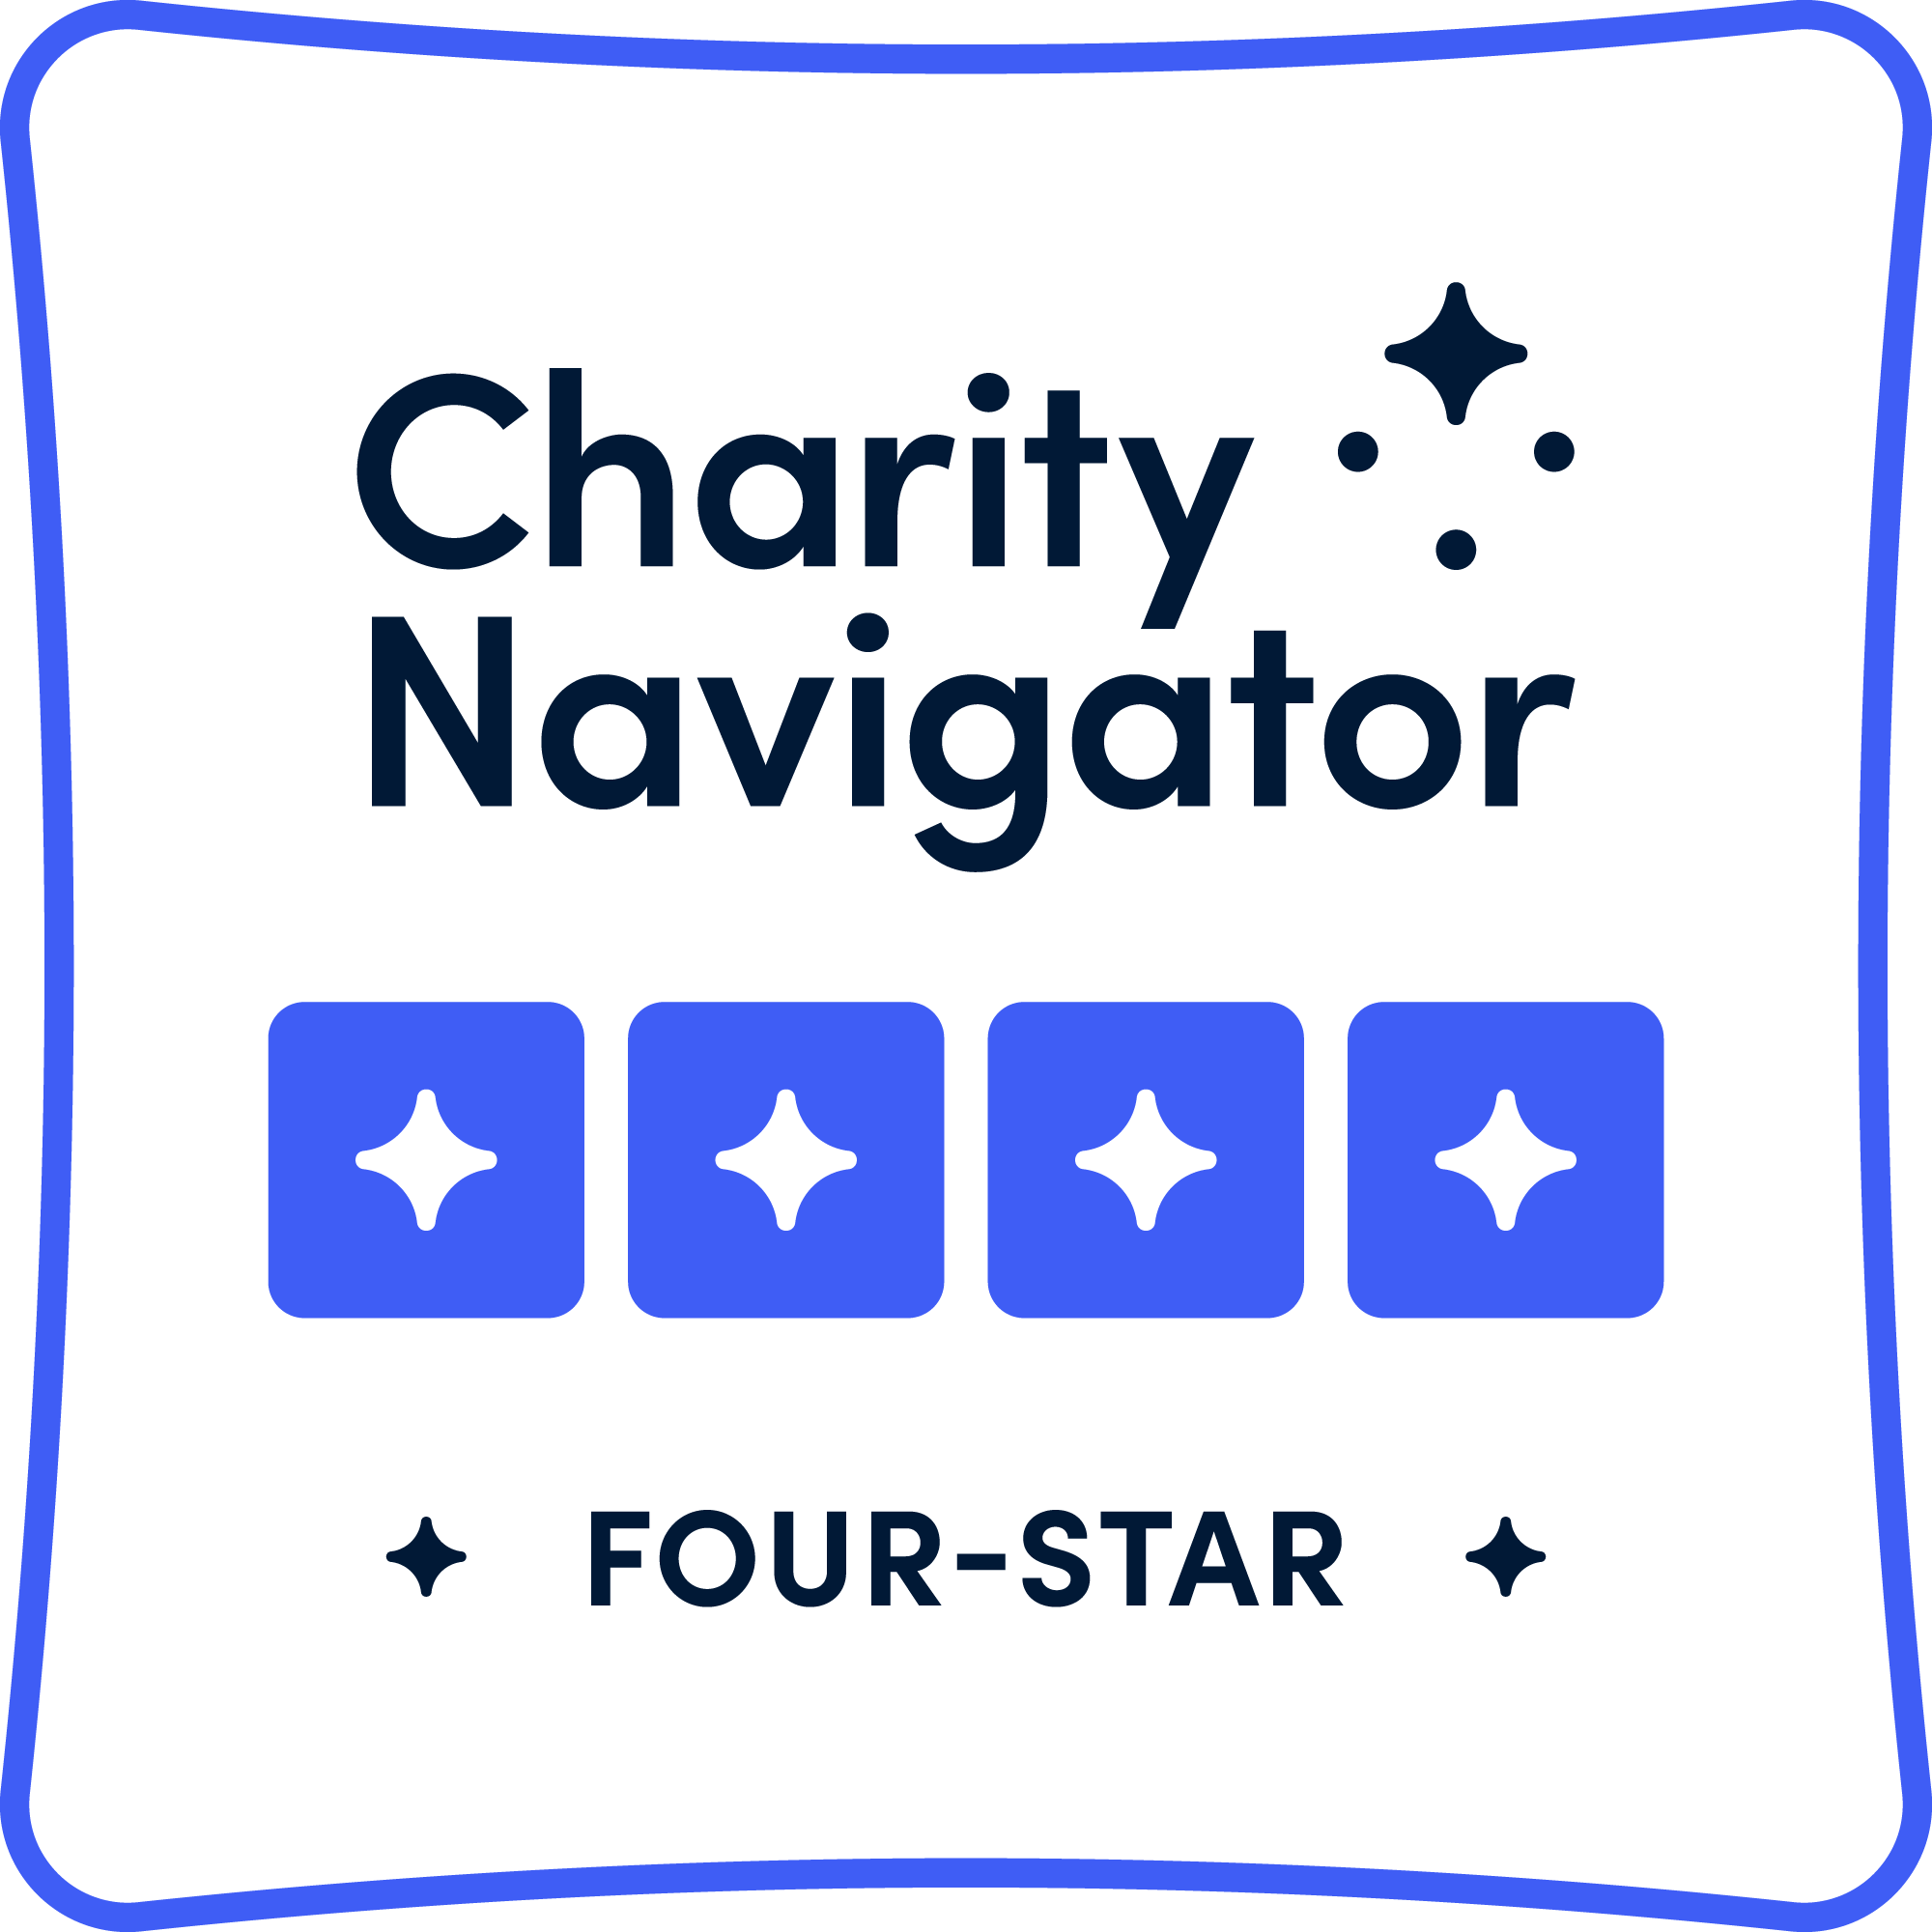 Charity Navigator Logo promoting Beyond Differences 4 Starr rating.